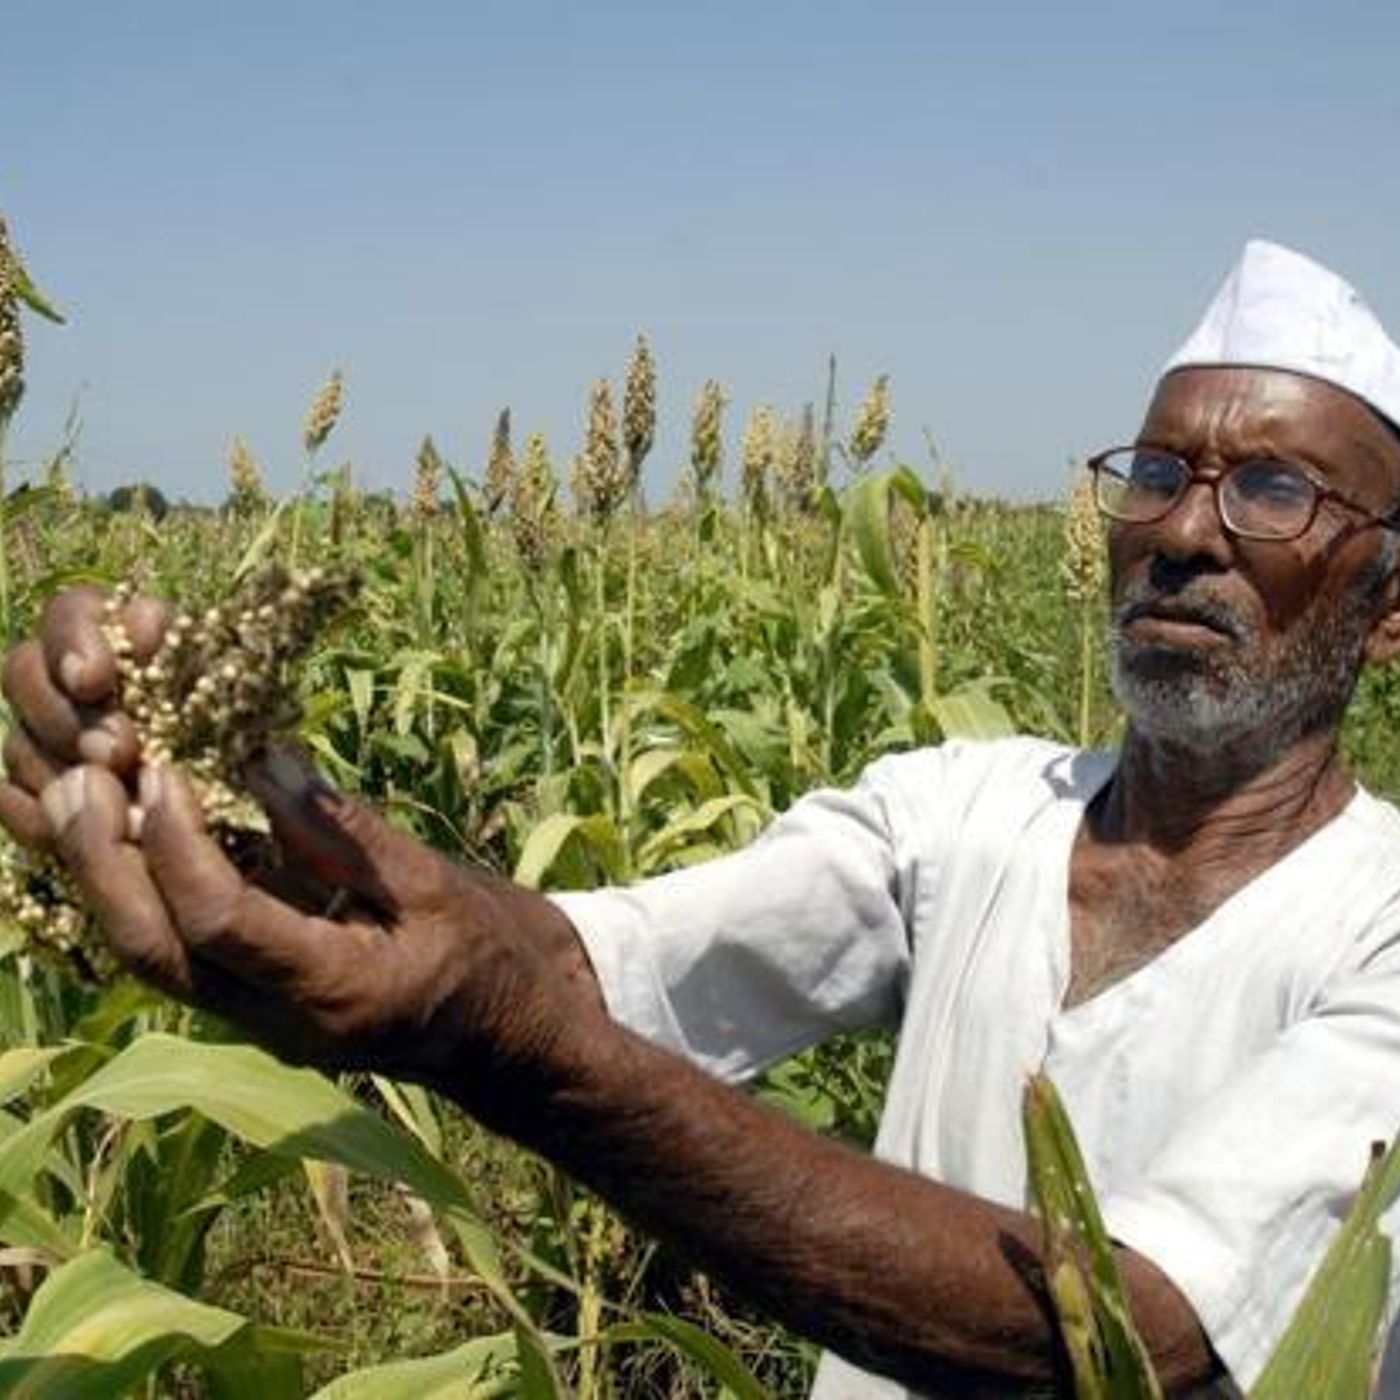 Farm loan waivers and telecom bailouts dominate the headlines this week